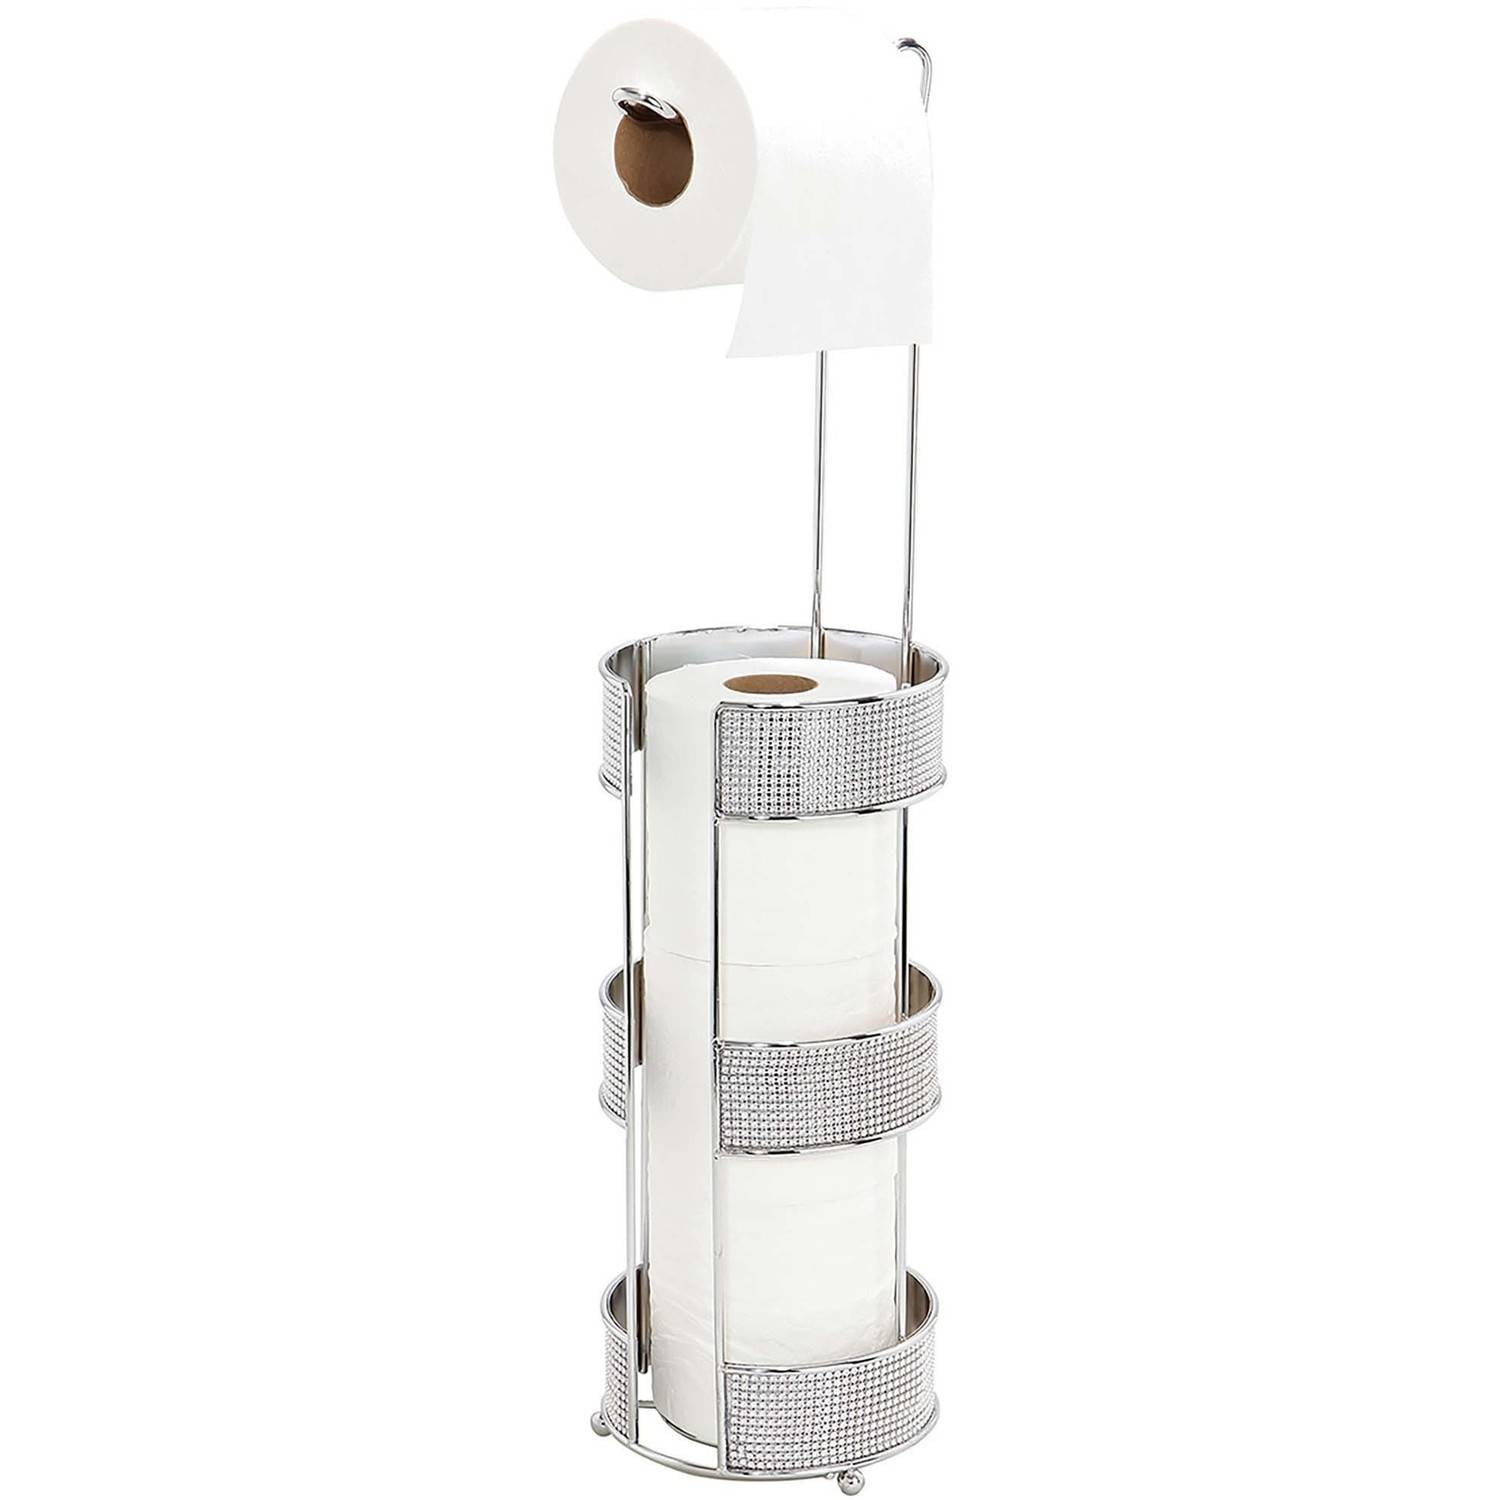 Diamante Sparkle Toilet Roll Holder Chrome Effect Finish Tall Free Standing 